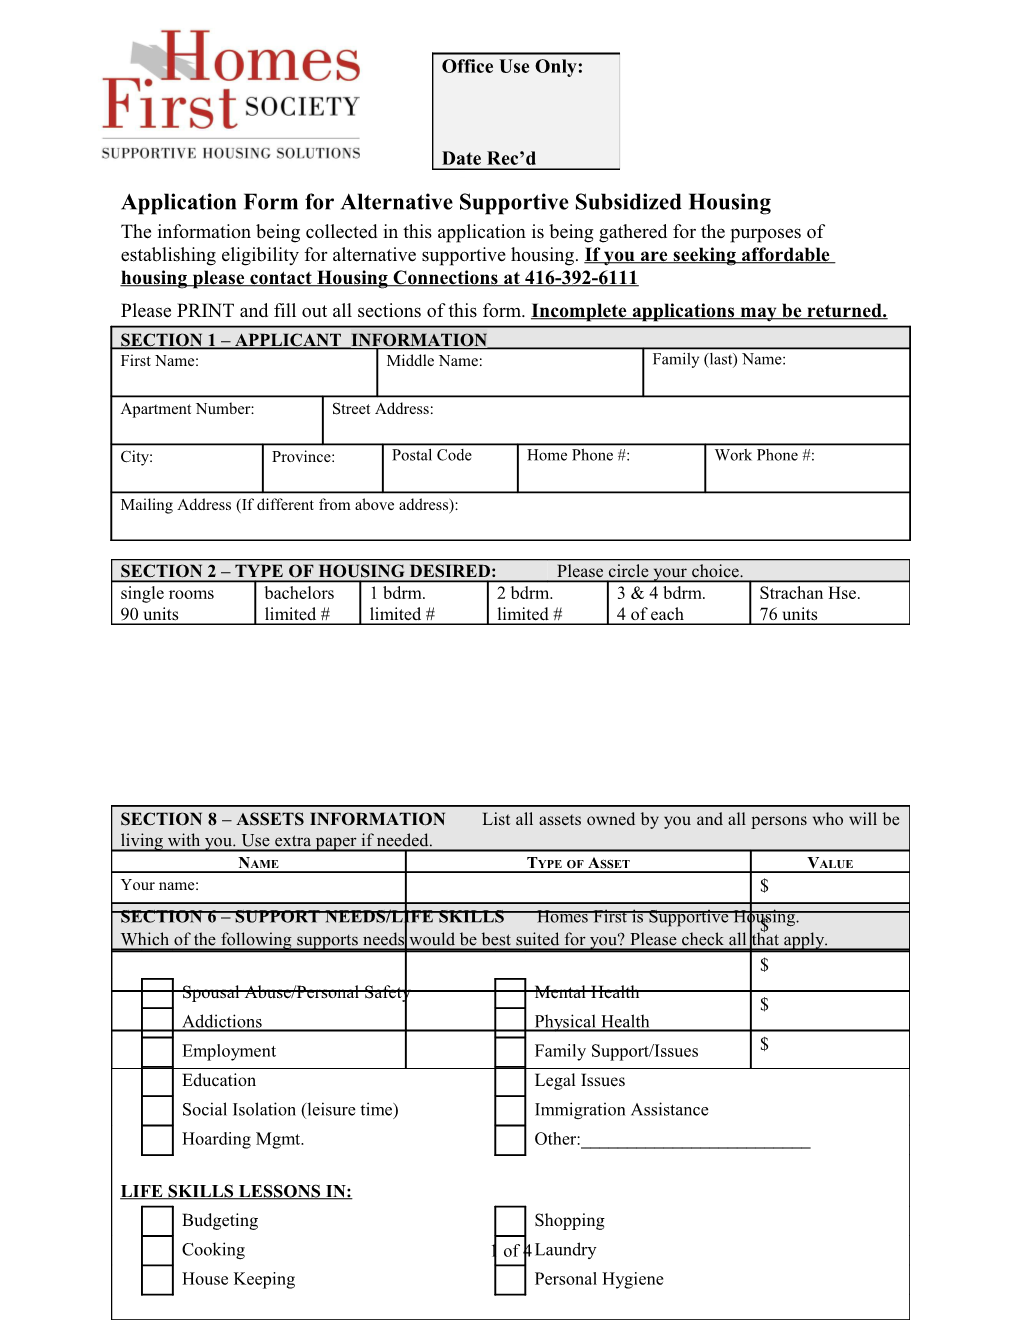 Application Form for Alternative Supportive Subsidized Housing